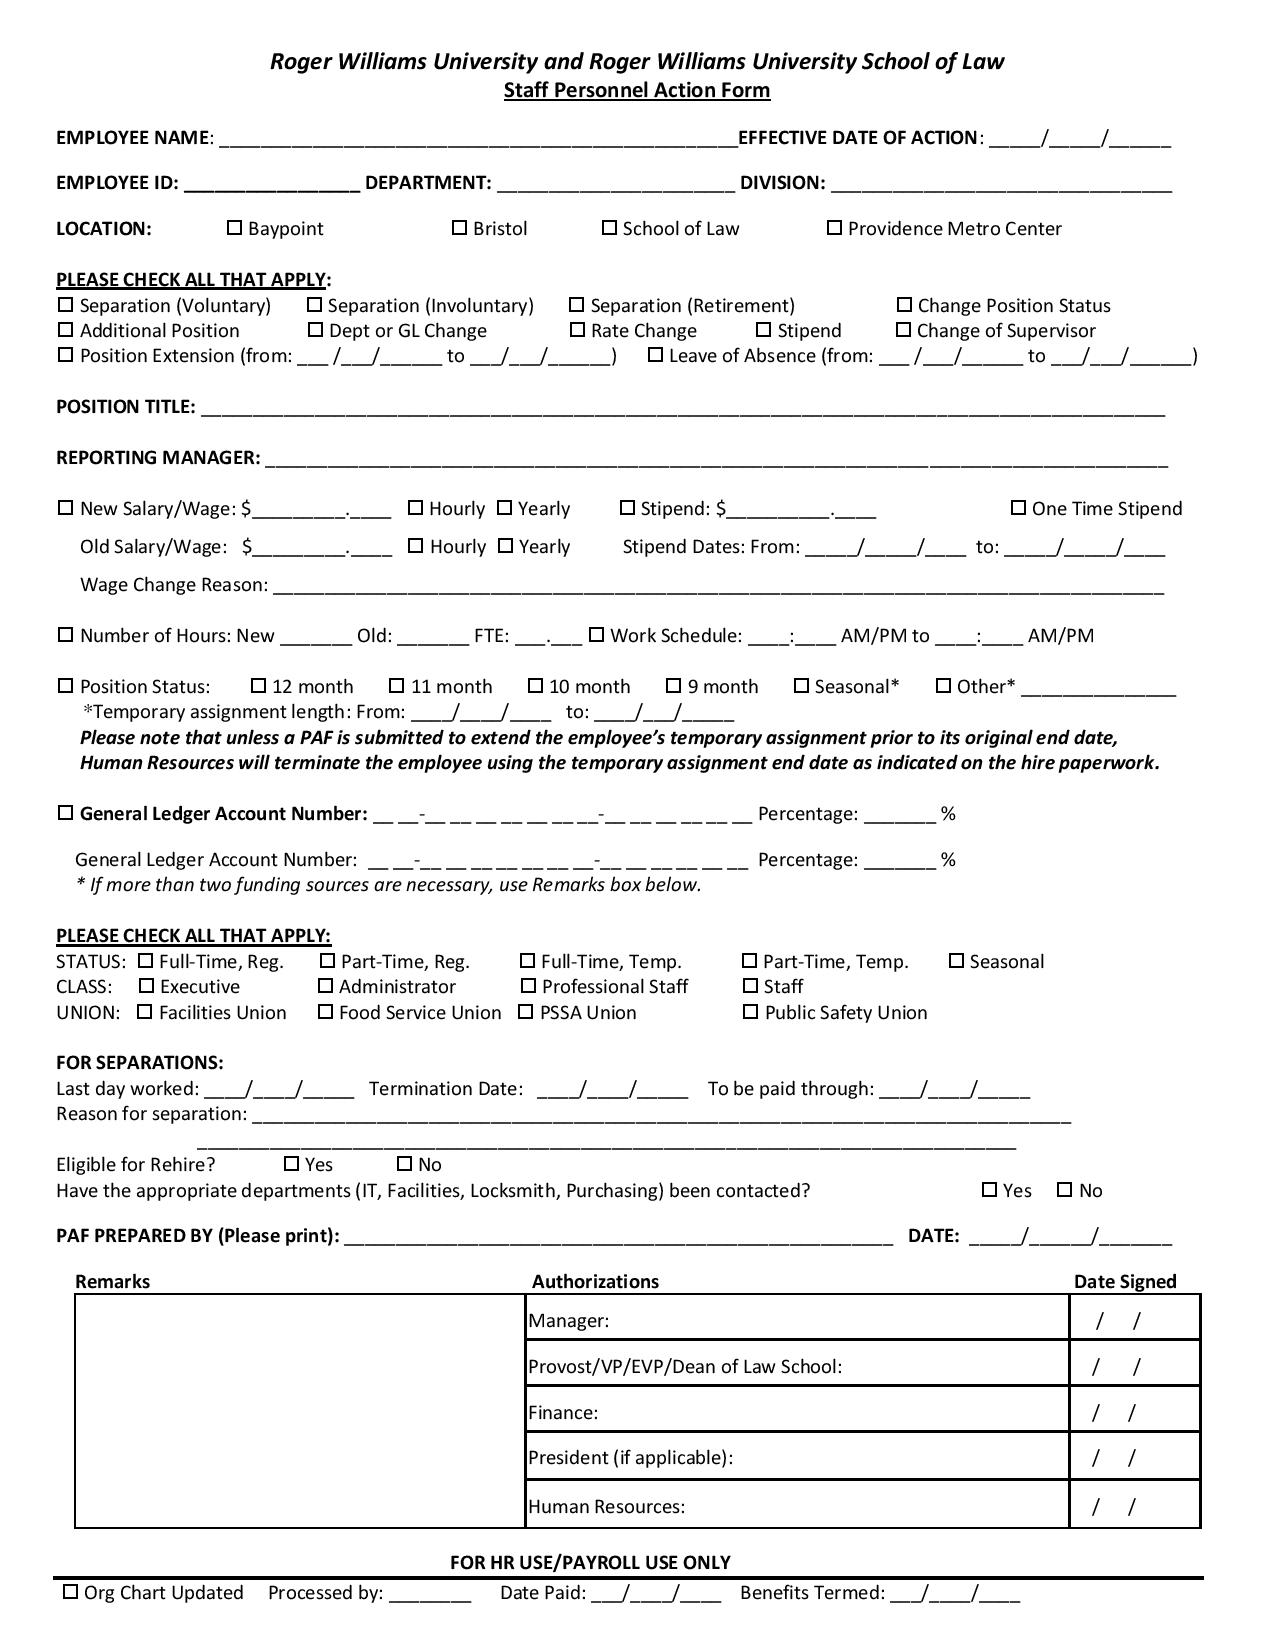 staff personnel action form page 0011